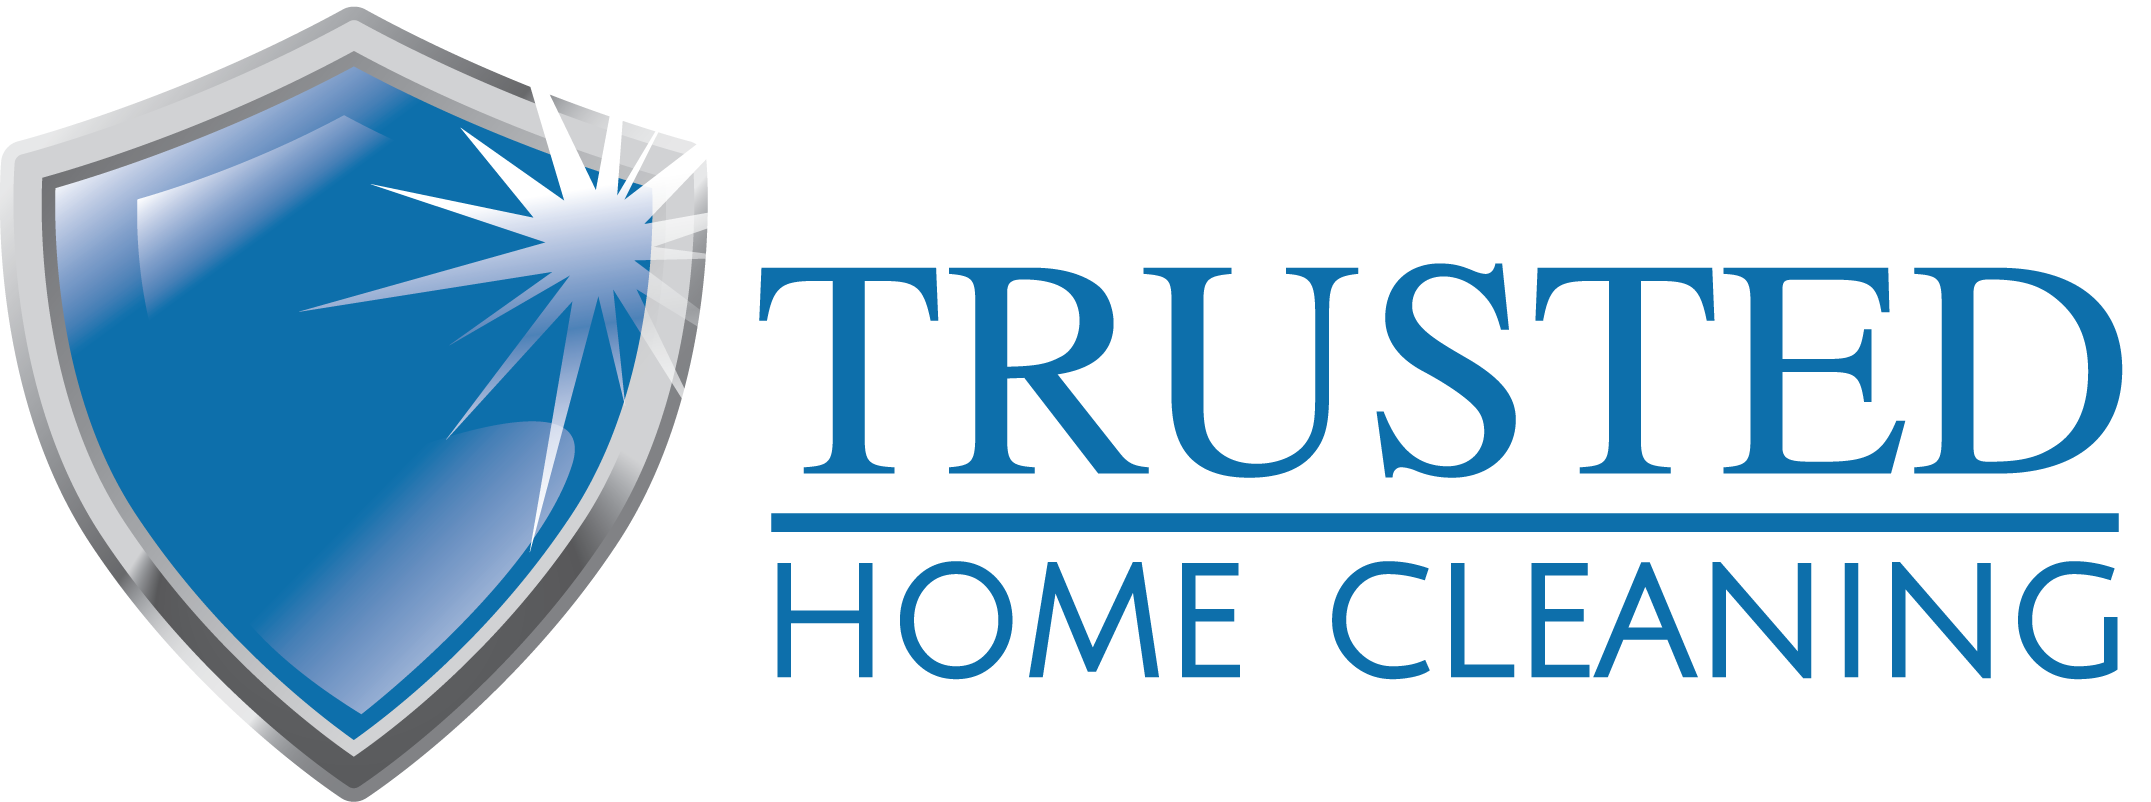 Trusted Home Cleaning Logo